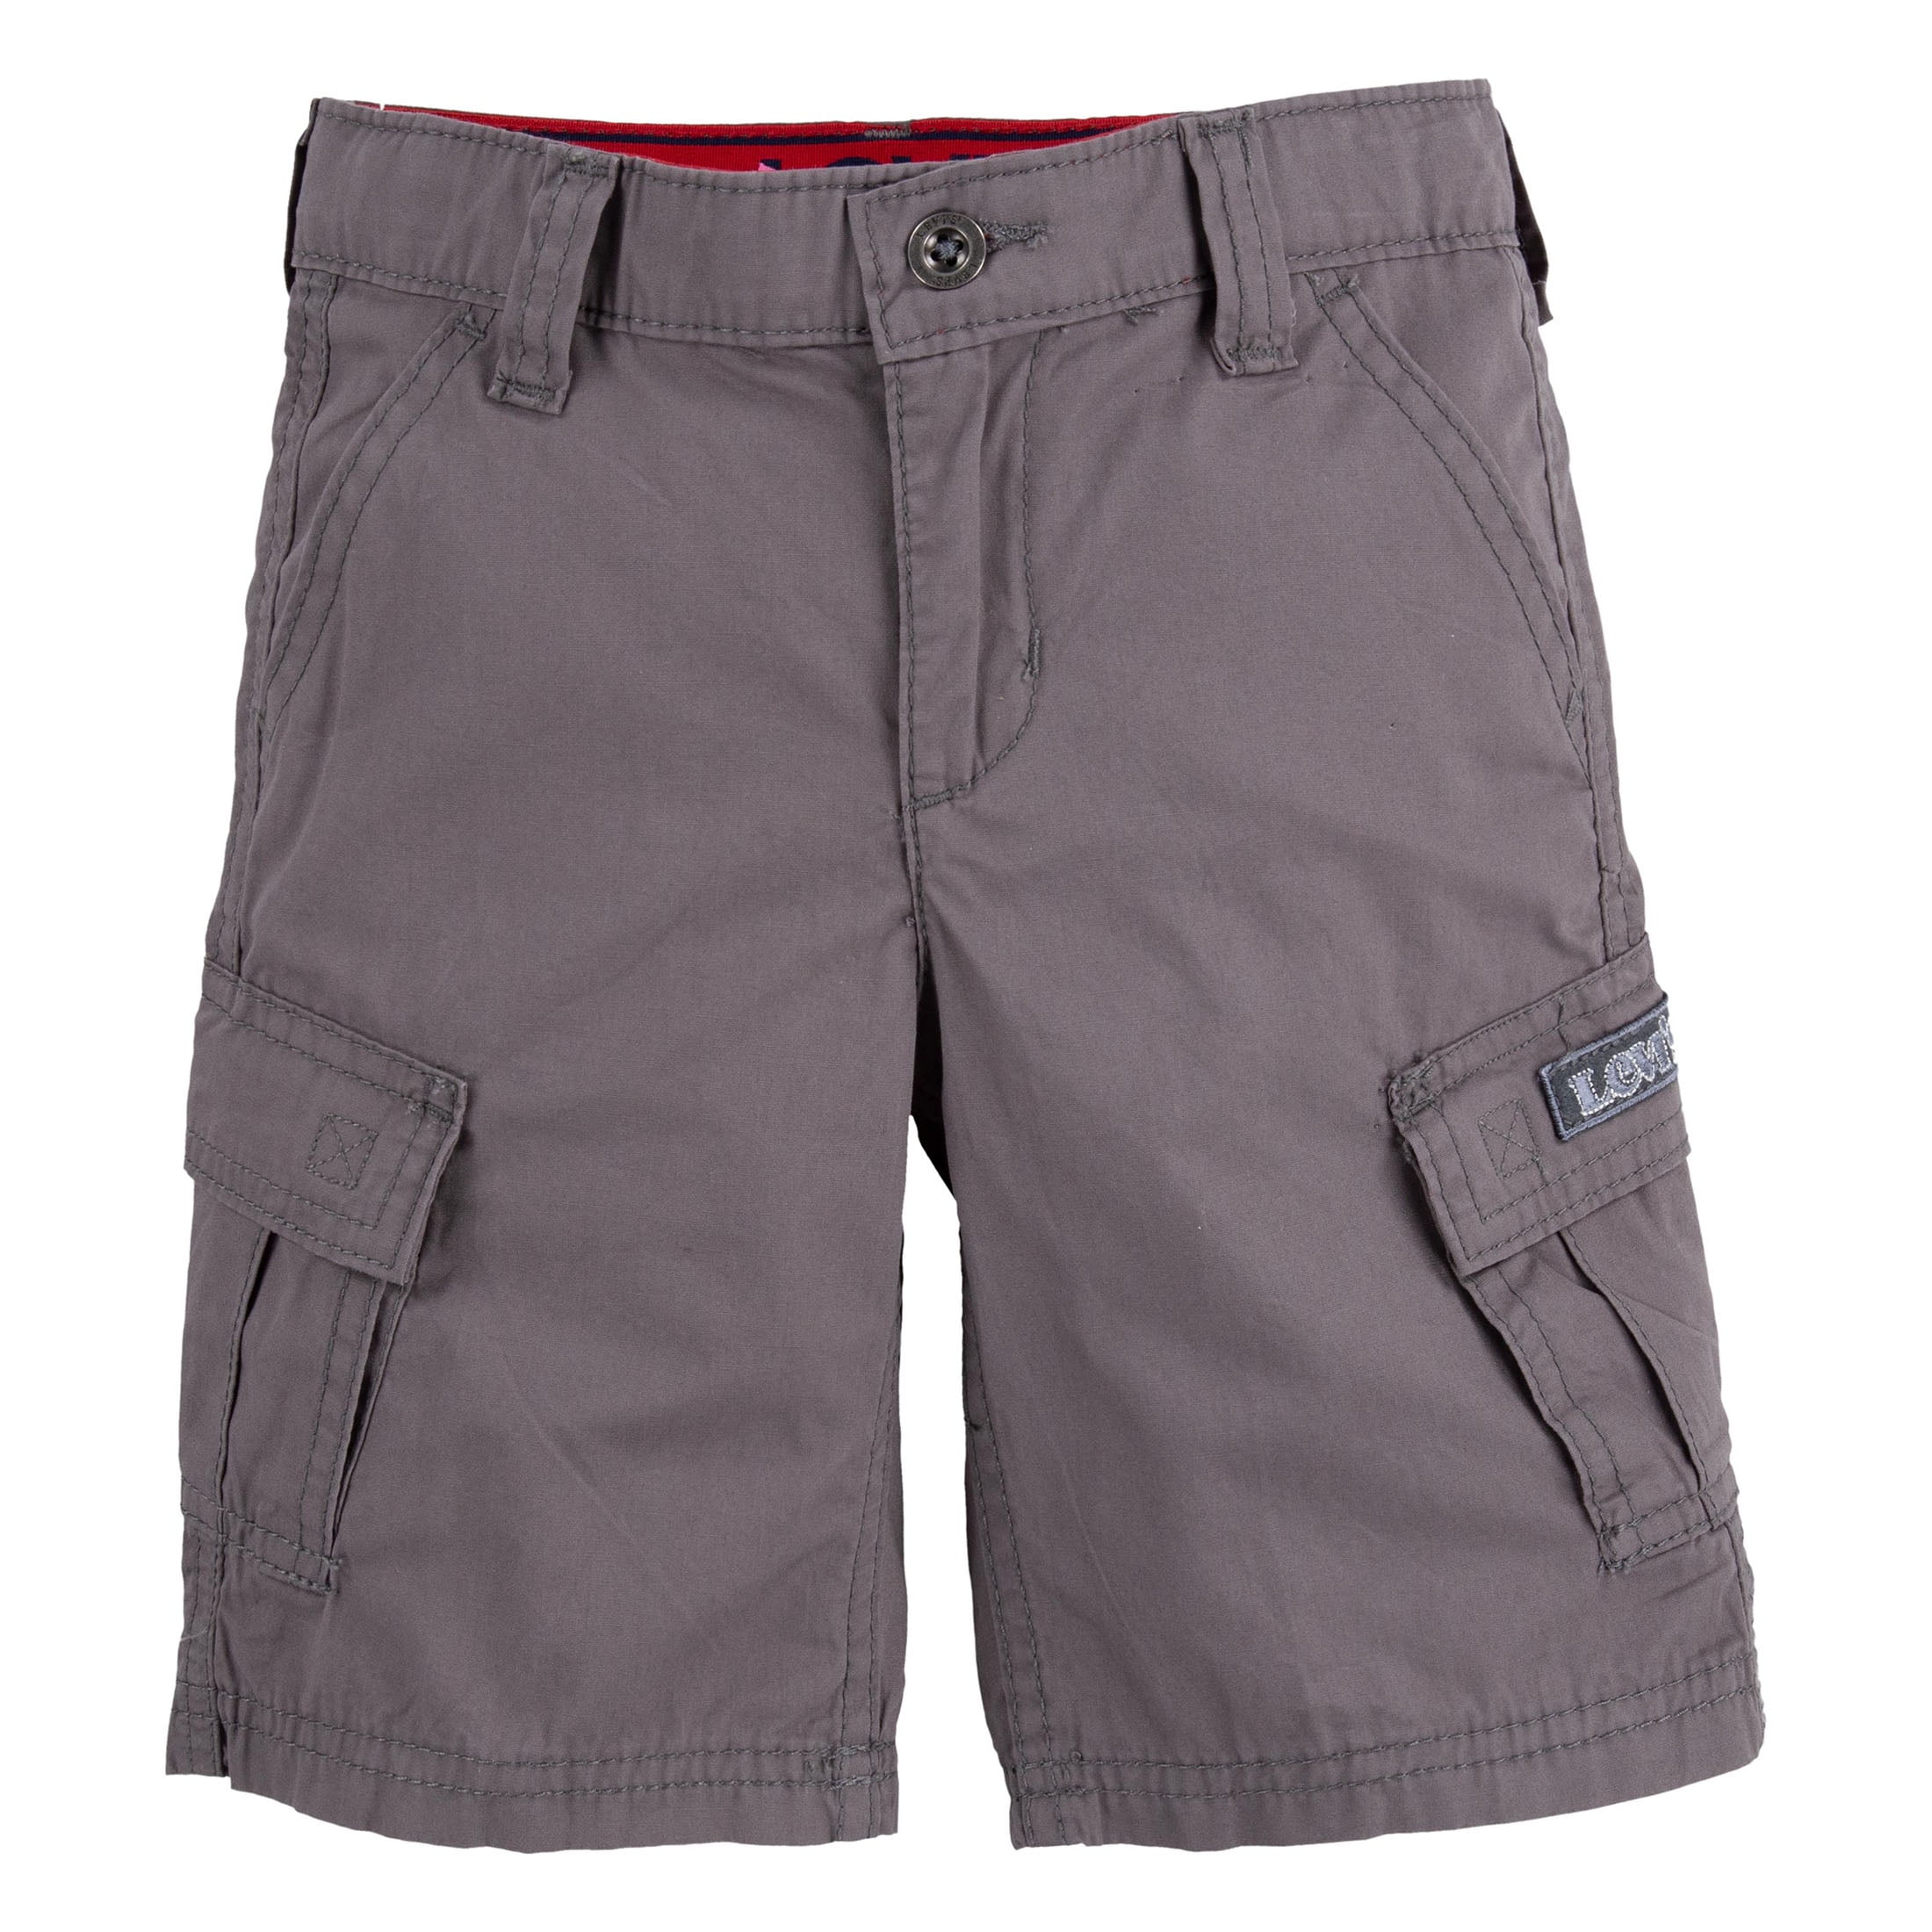 HILEELANG Little Toddler Boys' Shorts 2-Pack Chino Short Summer Cotton Casual Pants with Pockets 2-10Y 